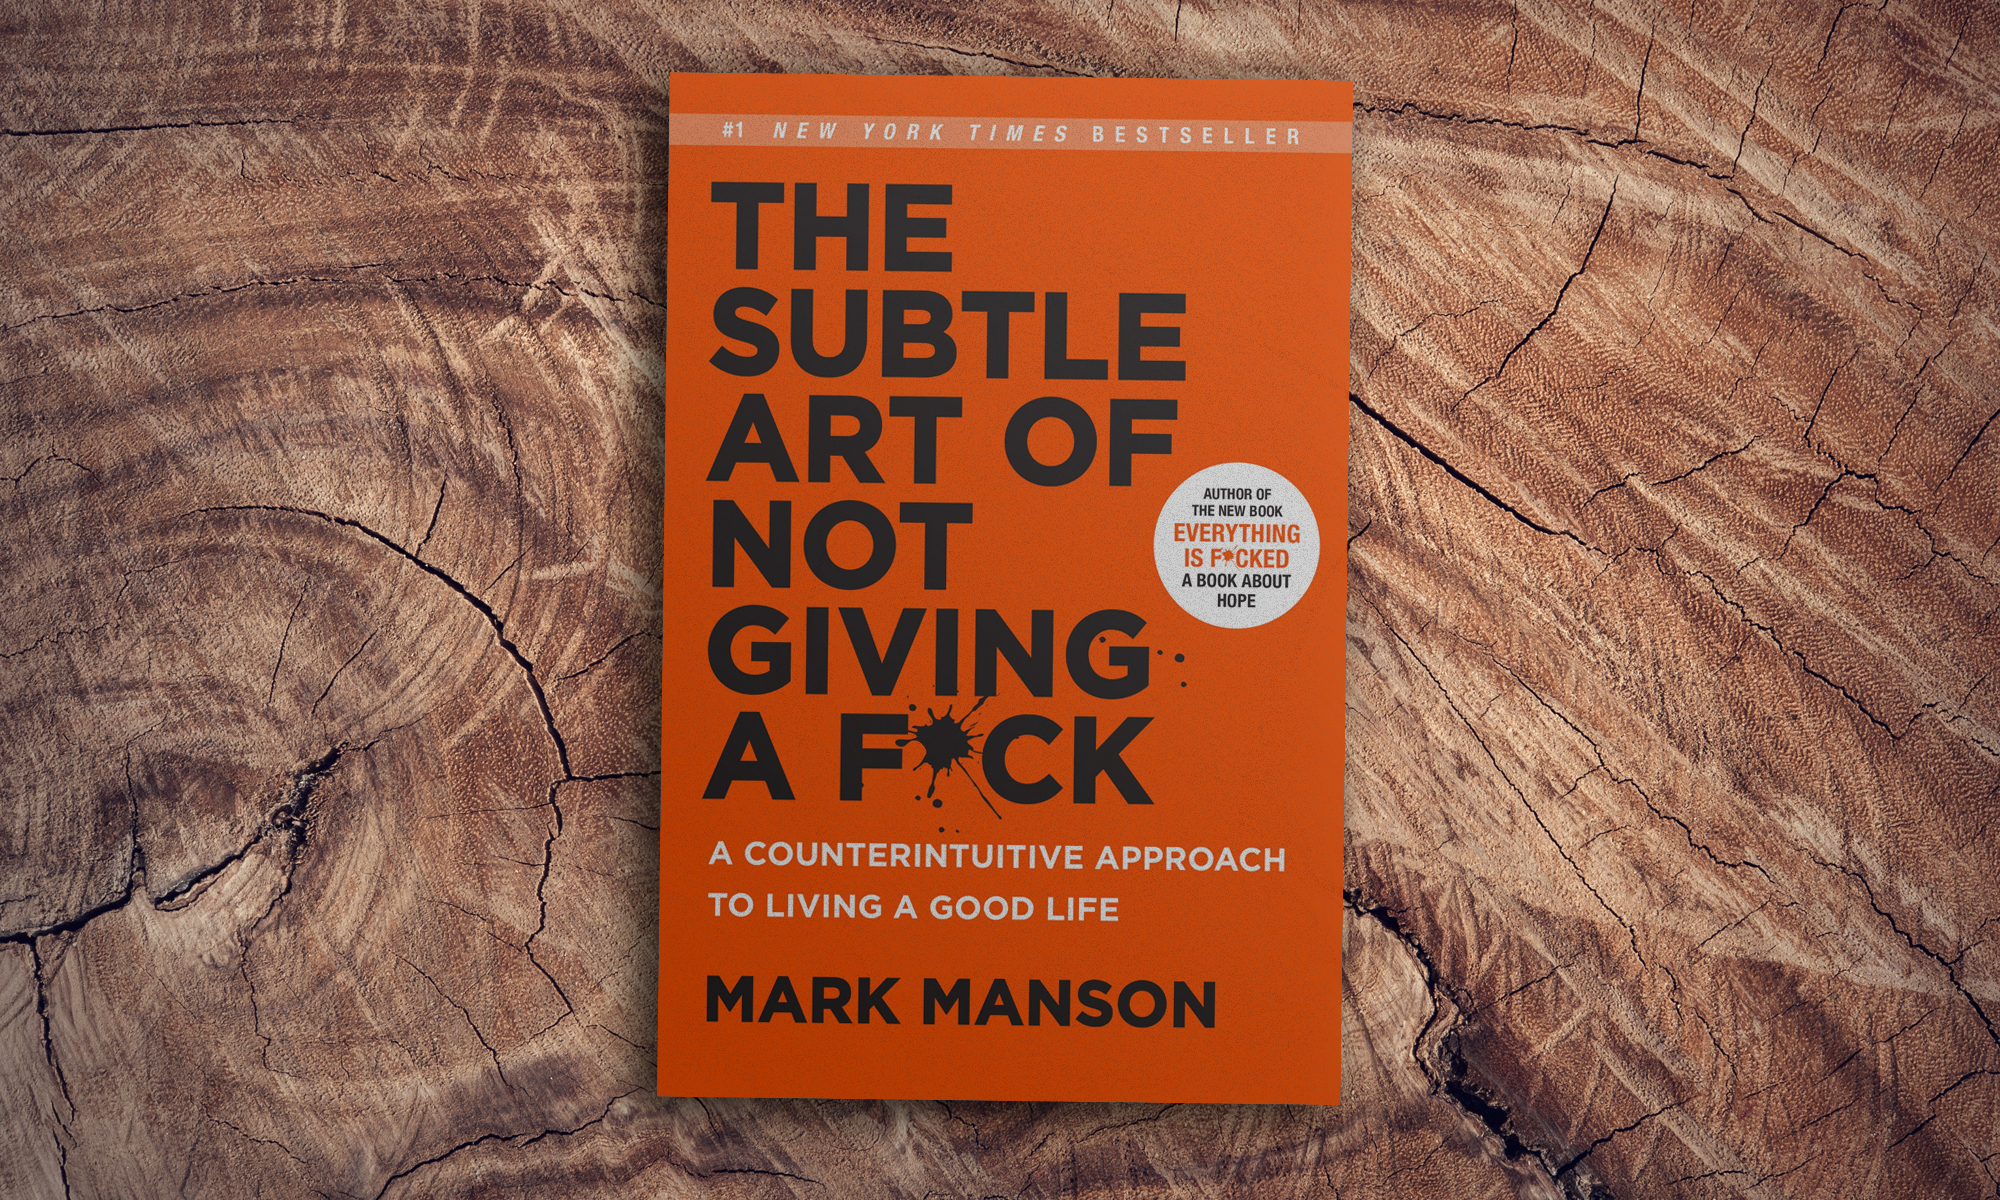 Cover of Mark Mansons book "The Subtle Art of not Giving a Fuck"